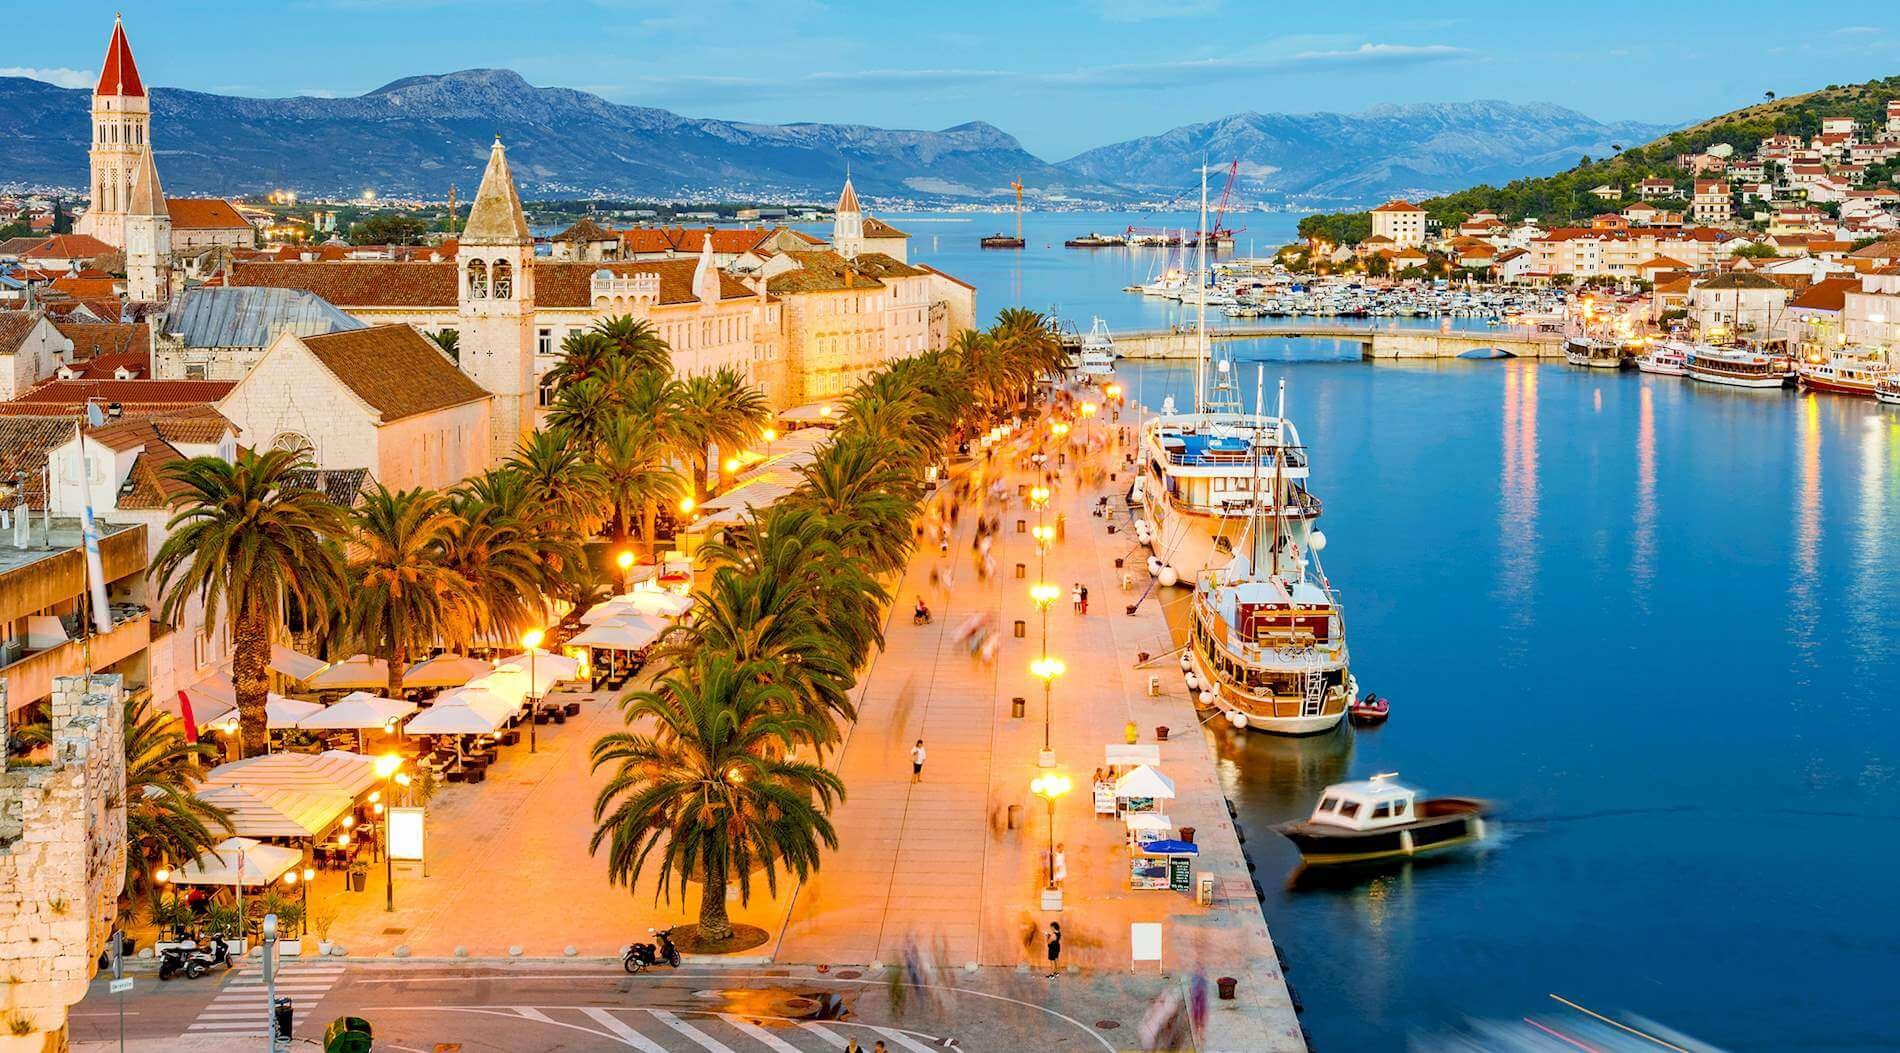 Guide to Trogir